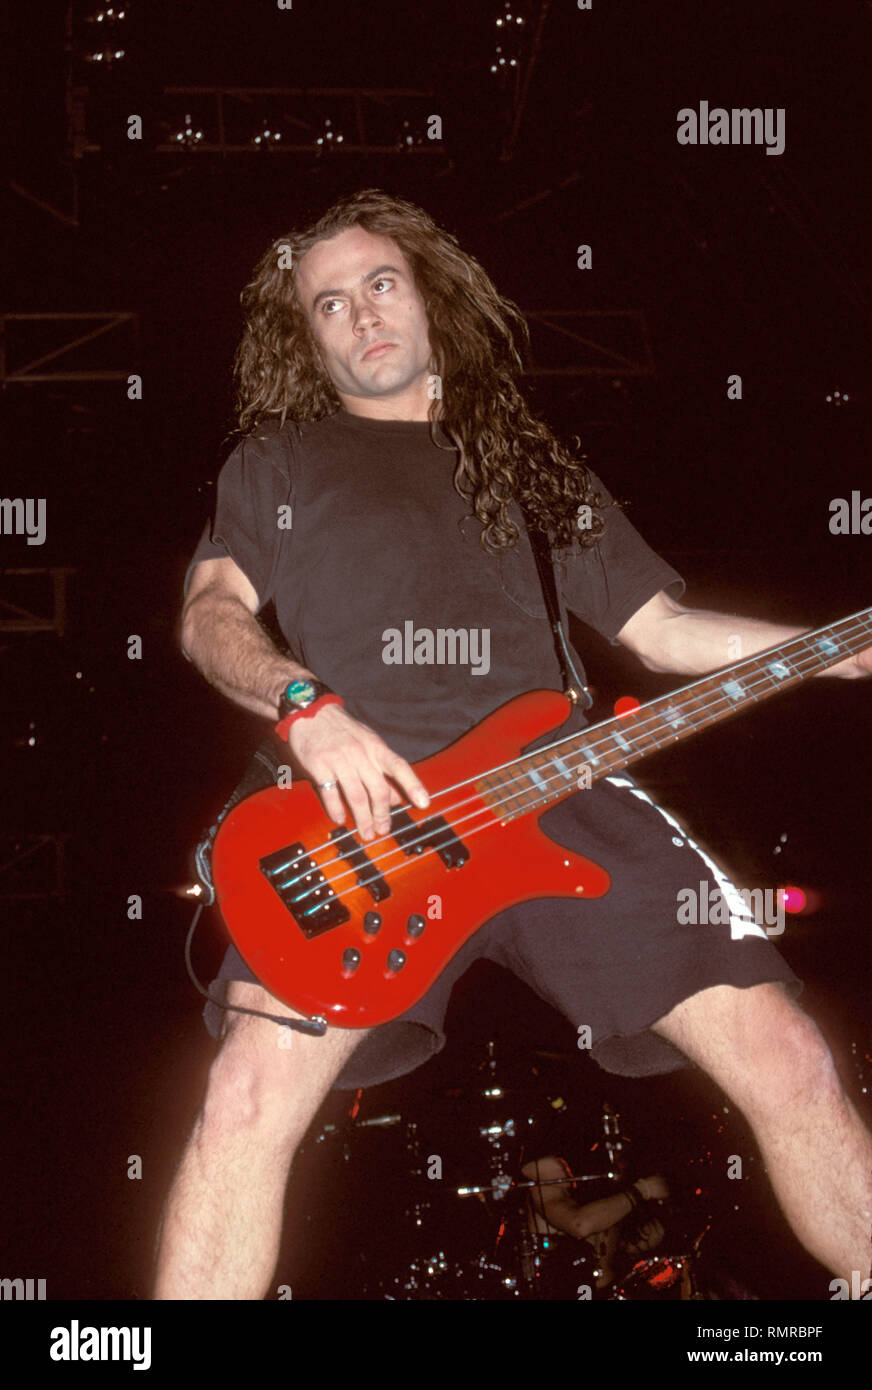 Alice In Chains bassist Mike Inez is shown performing "live" in concert  Stock Photo - Alamy